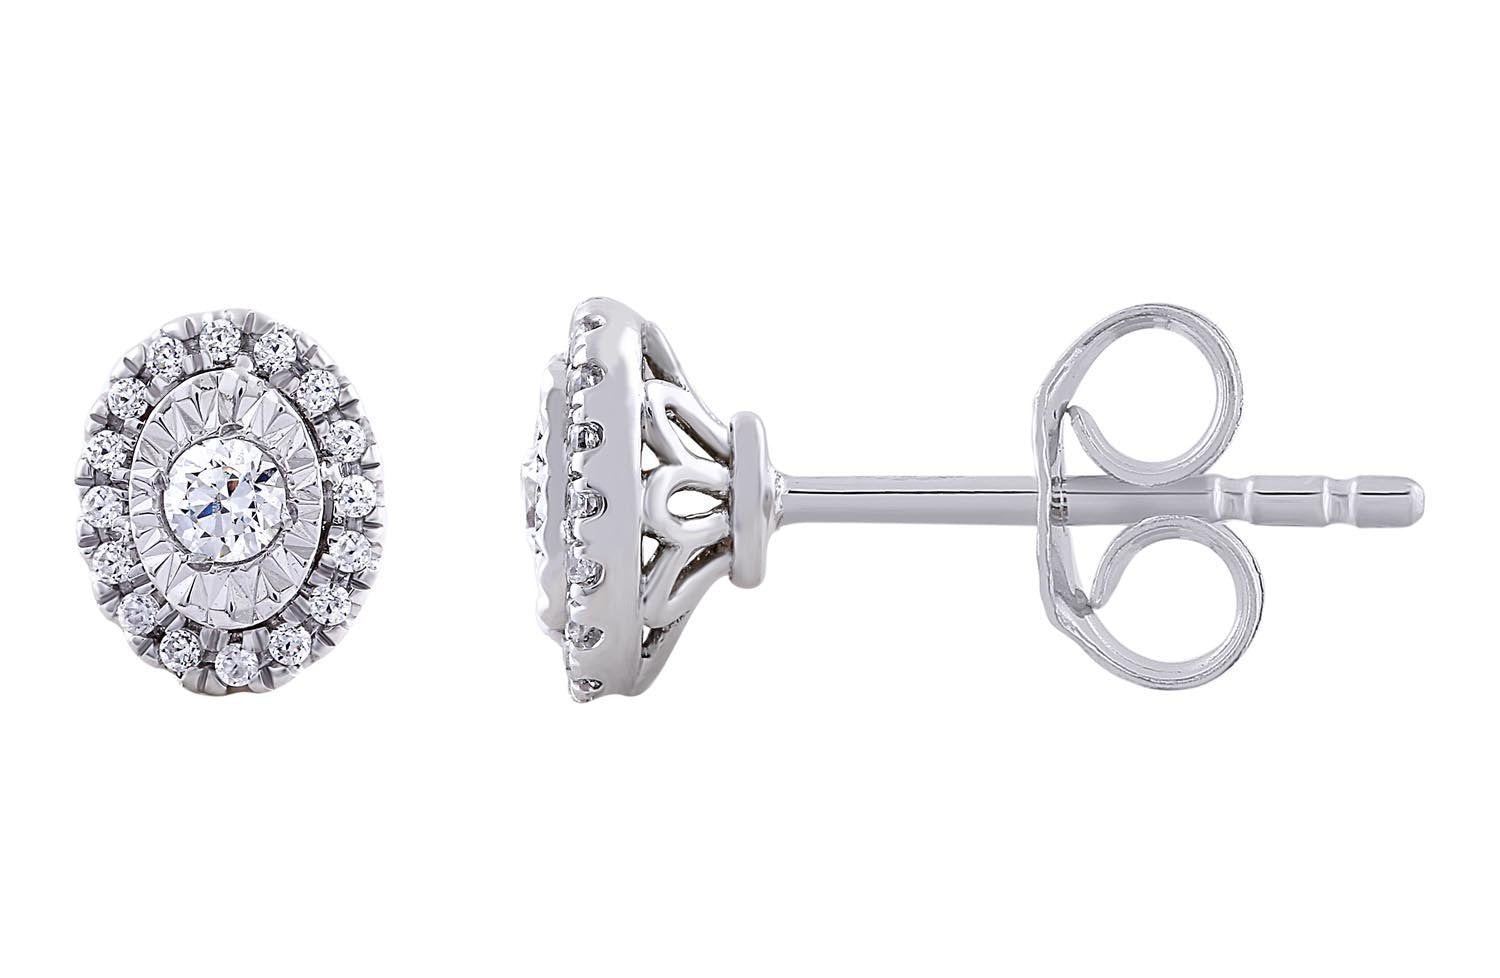 Stud Earrings with 0.2ct Diamonds in 9K White Gold